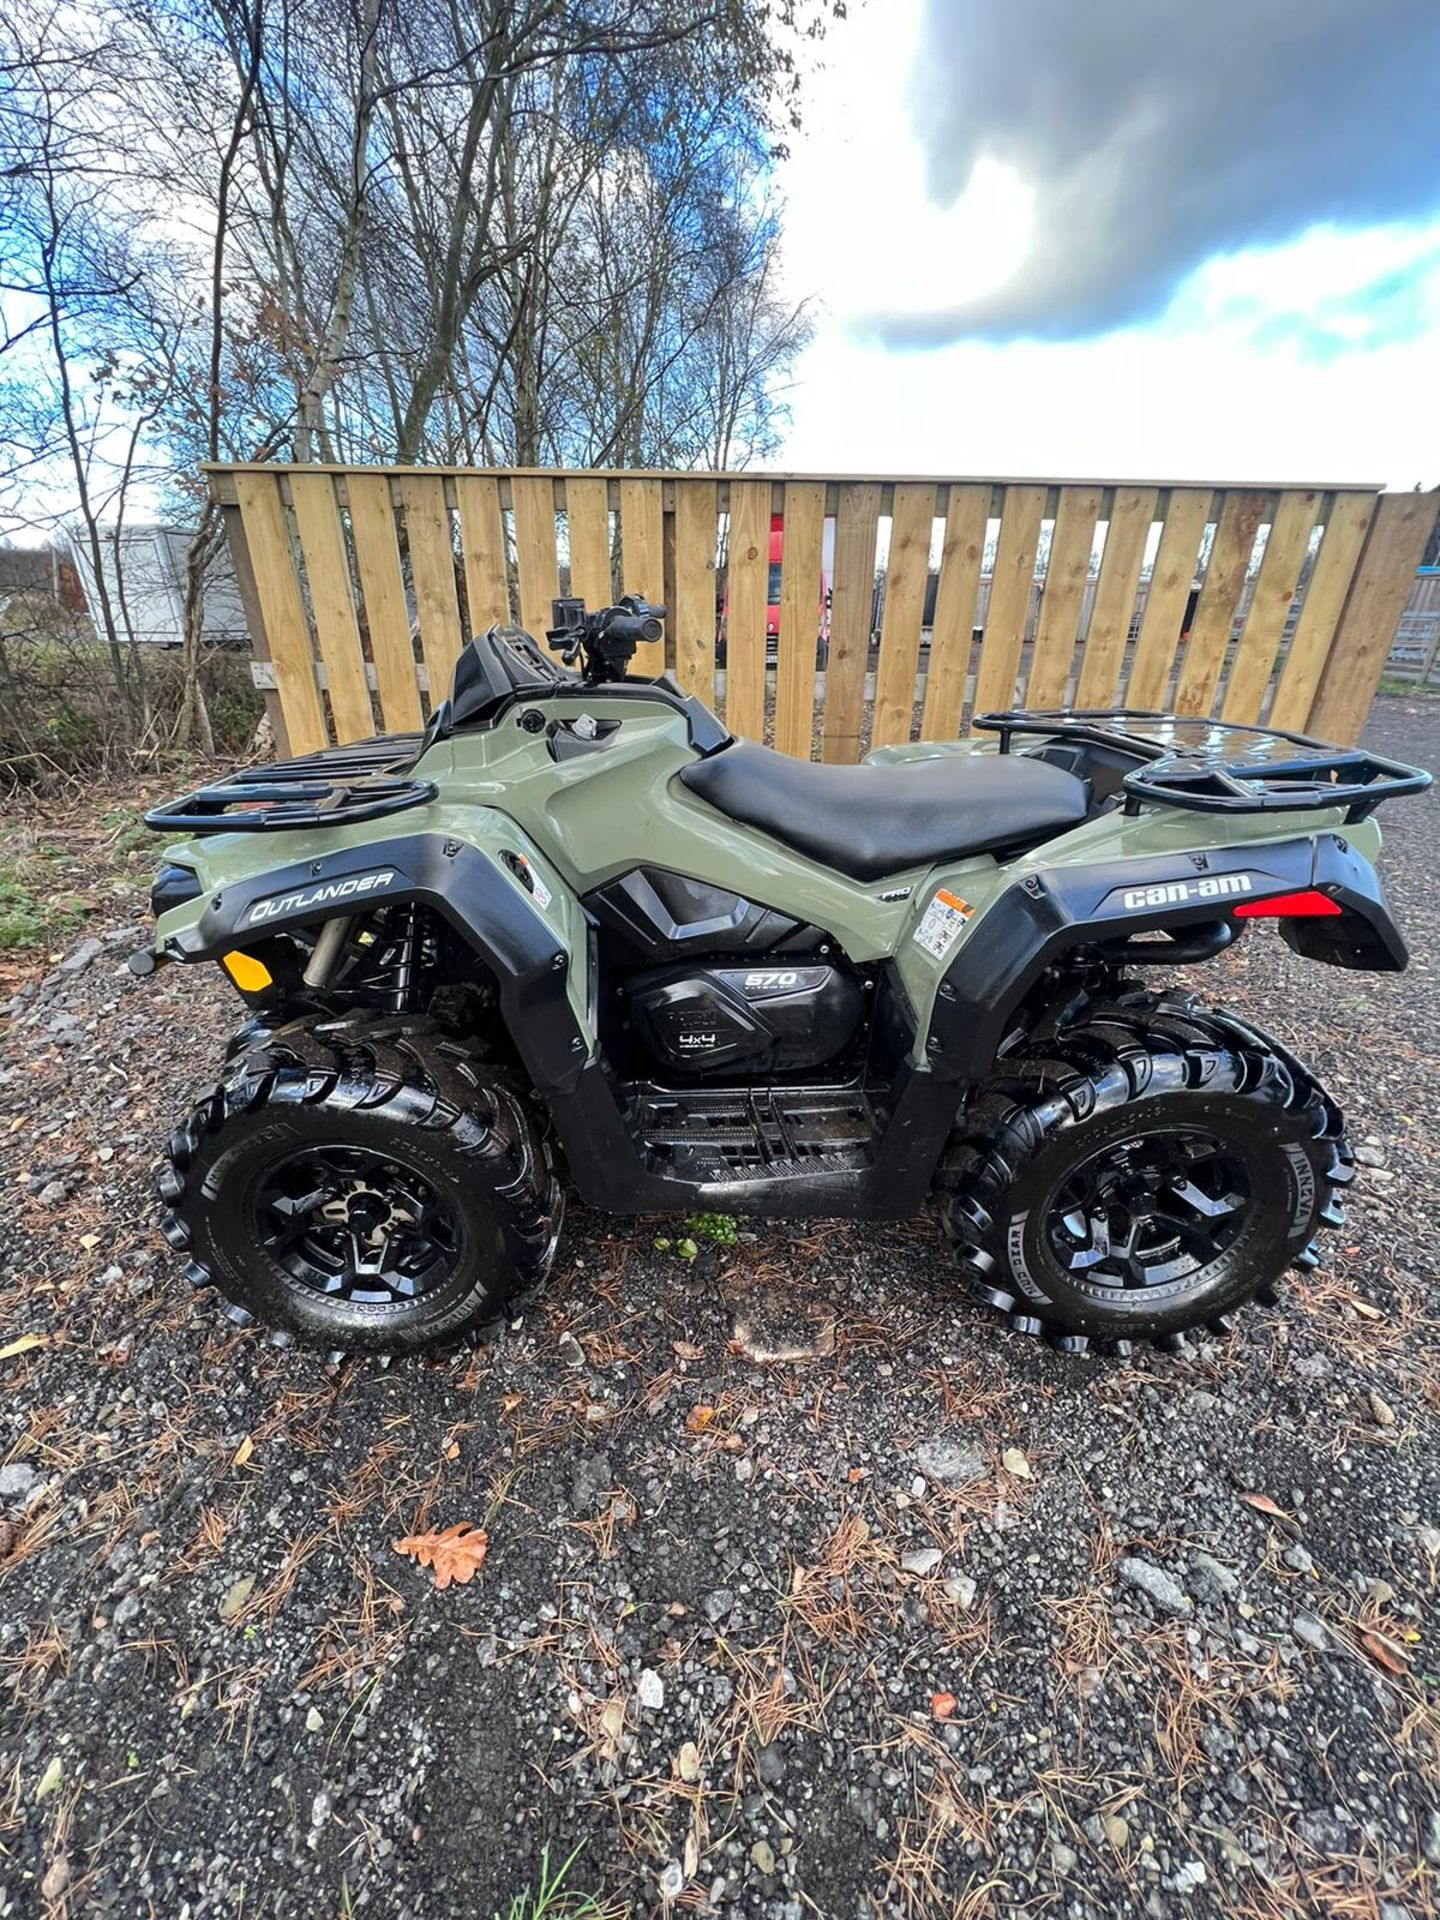 4X4 CAN AM OUTLANDER PRO 570 ROAD LEGAL